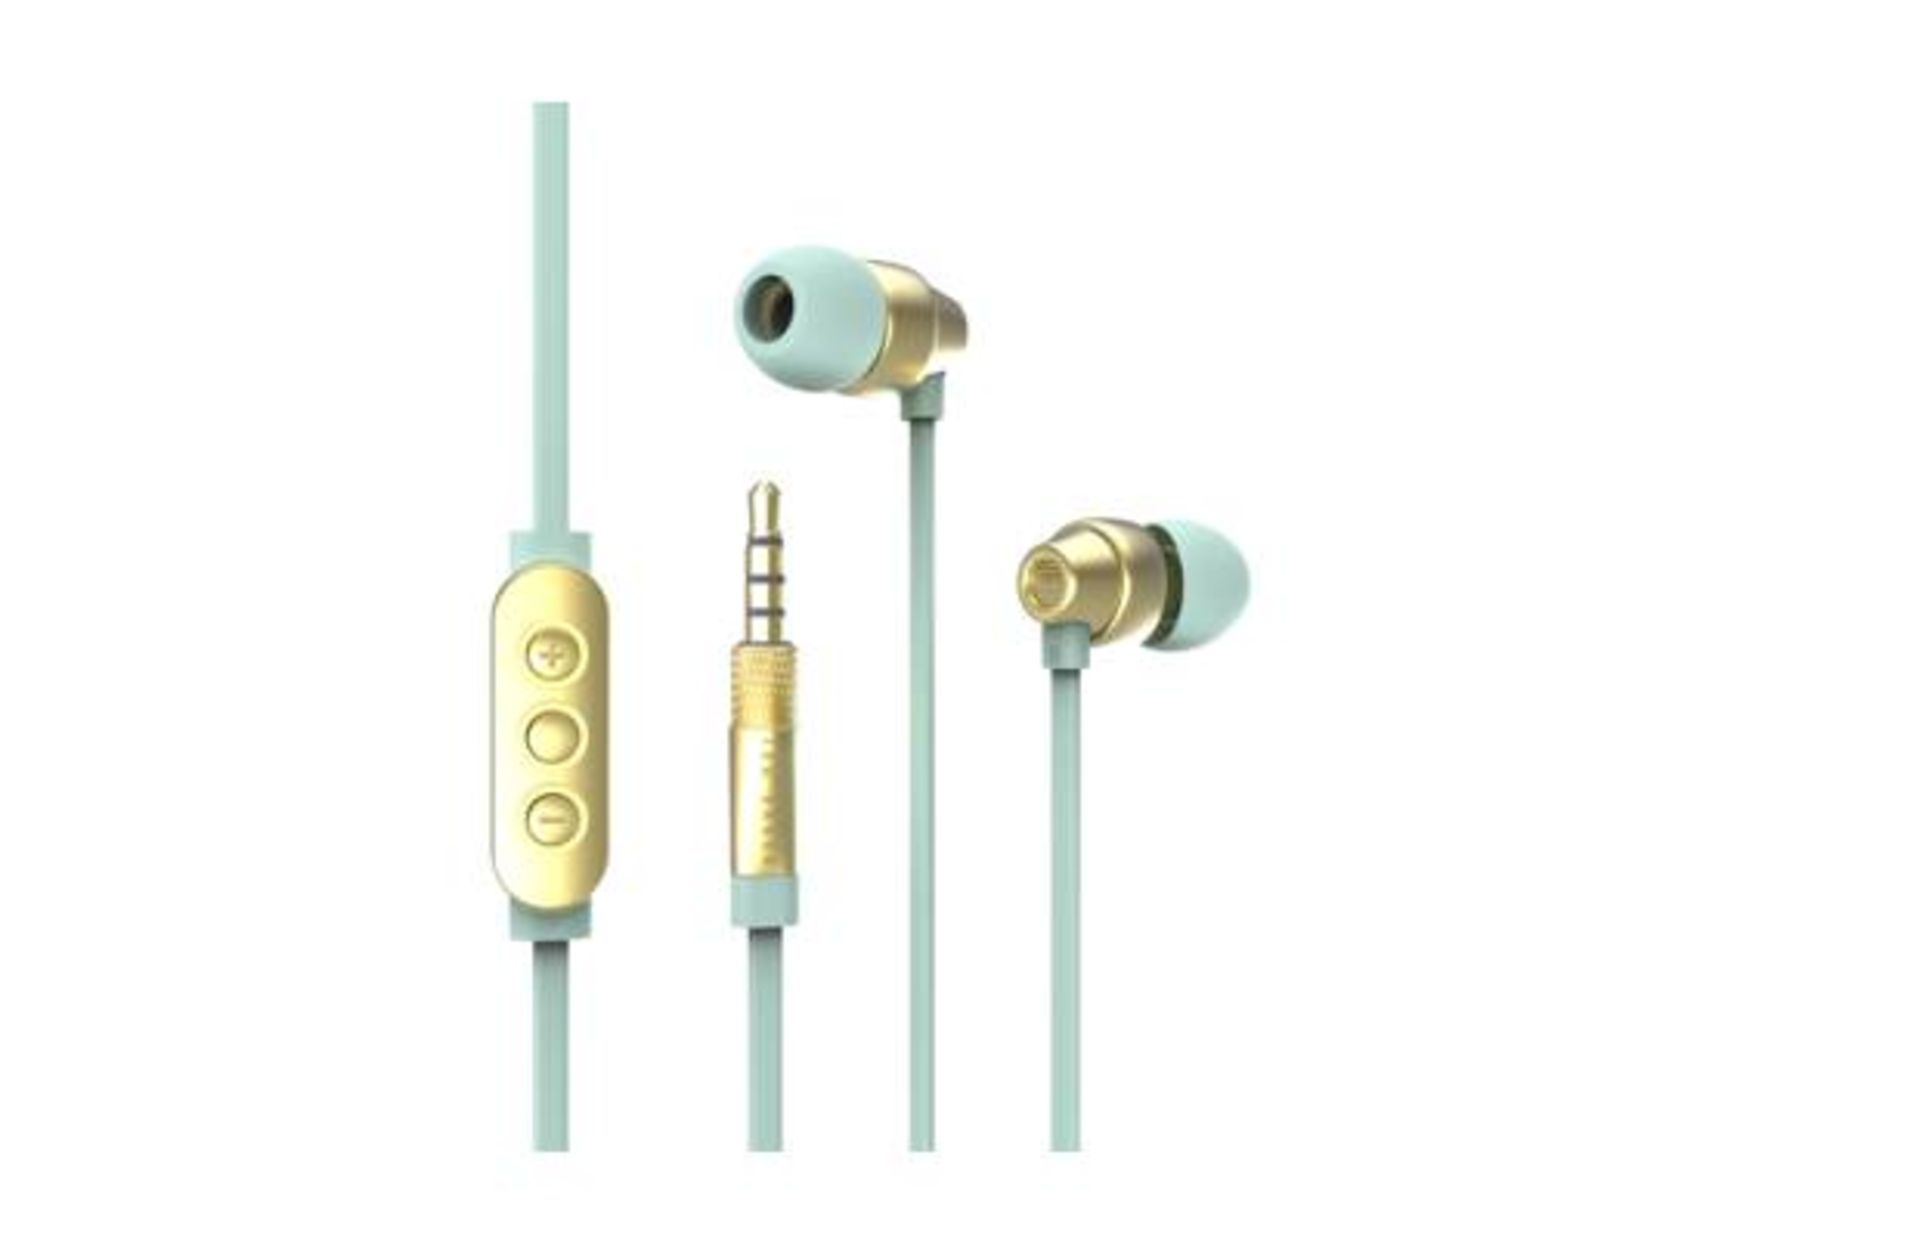 V *TRADE QTY* Brand New Ted Baker Dover In-Ear Headphones In Mint/Gold RRP£59.95 eBay£39.99 X 3 YOUR